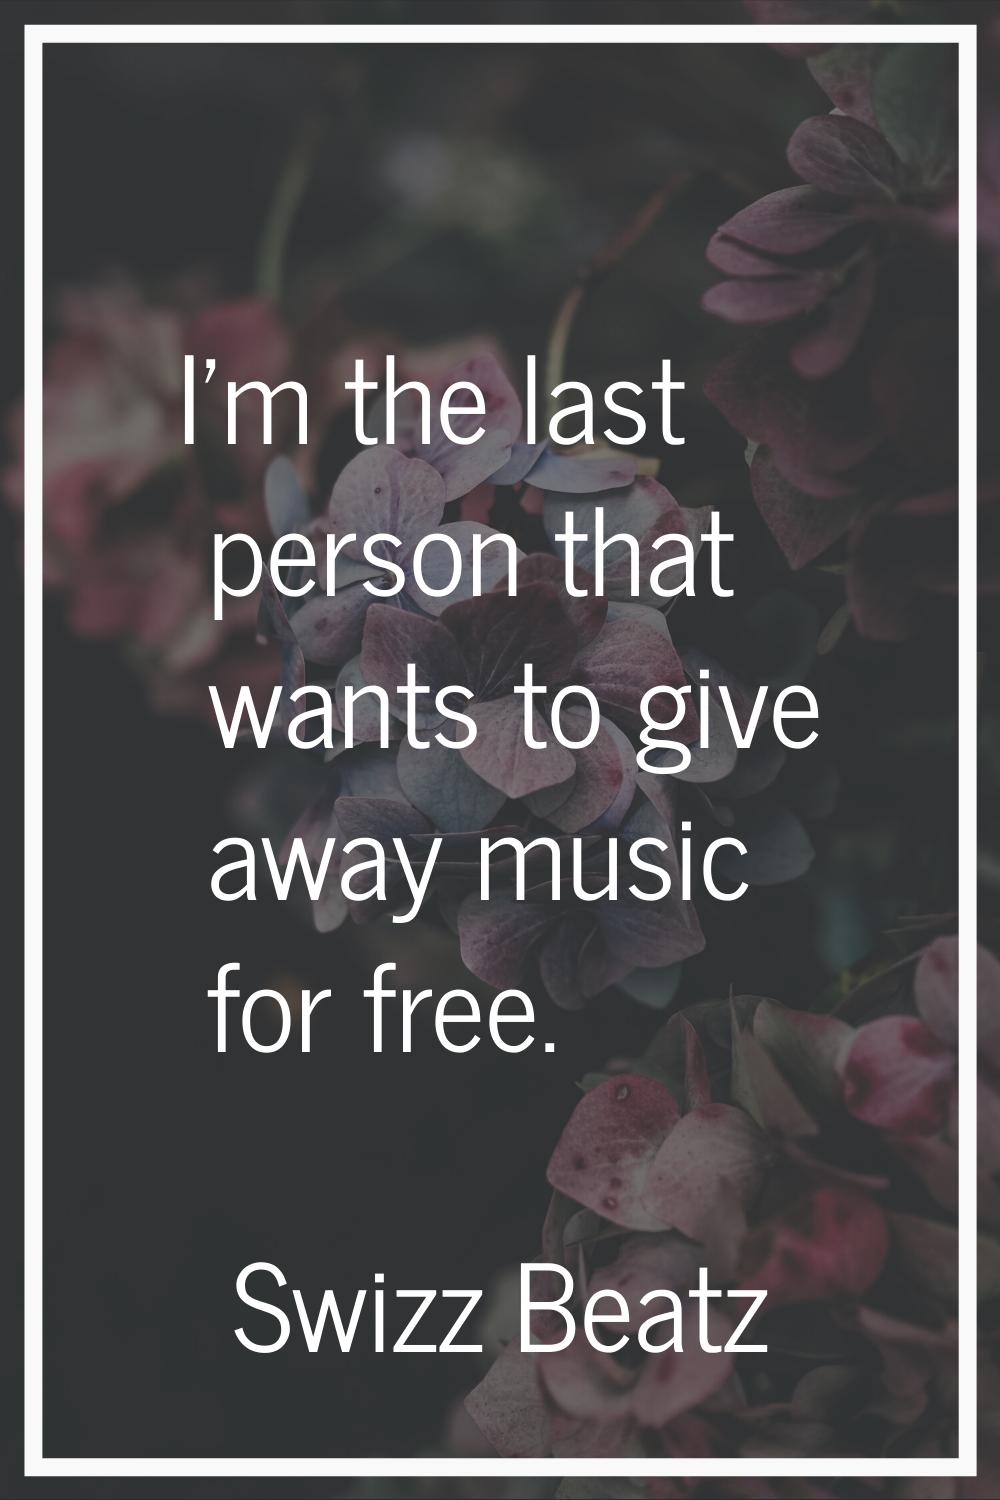 I'm the last person that wants to give away music for free.